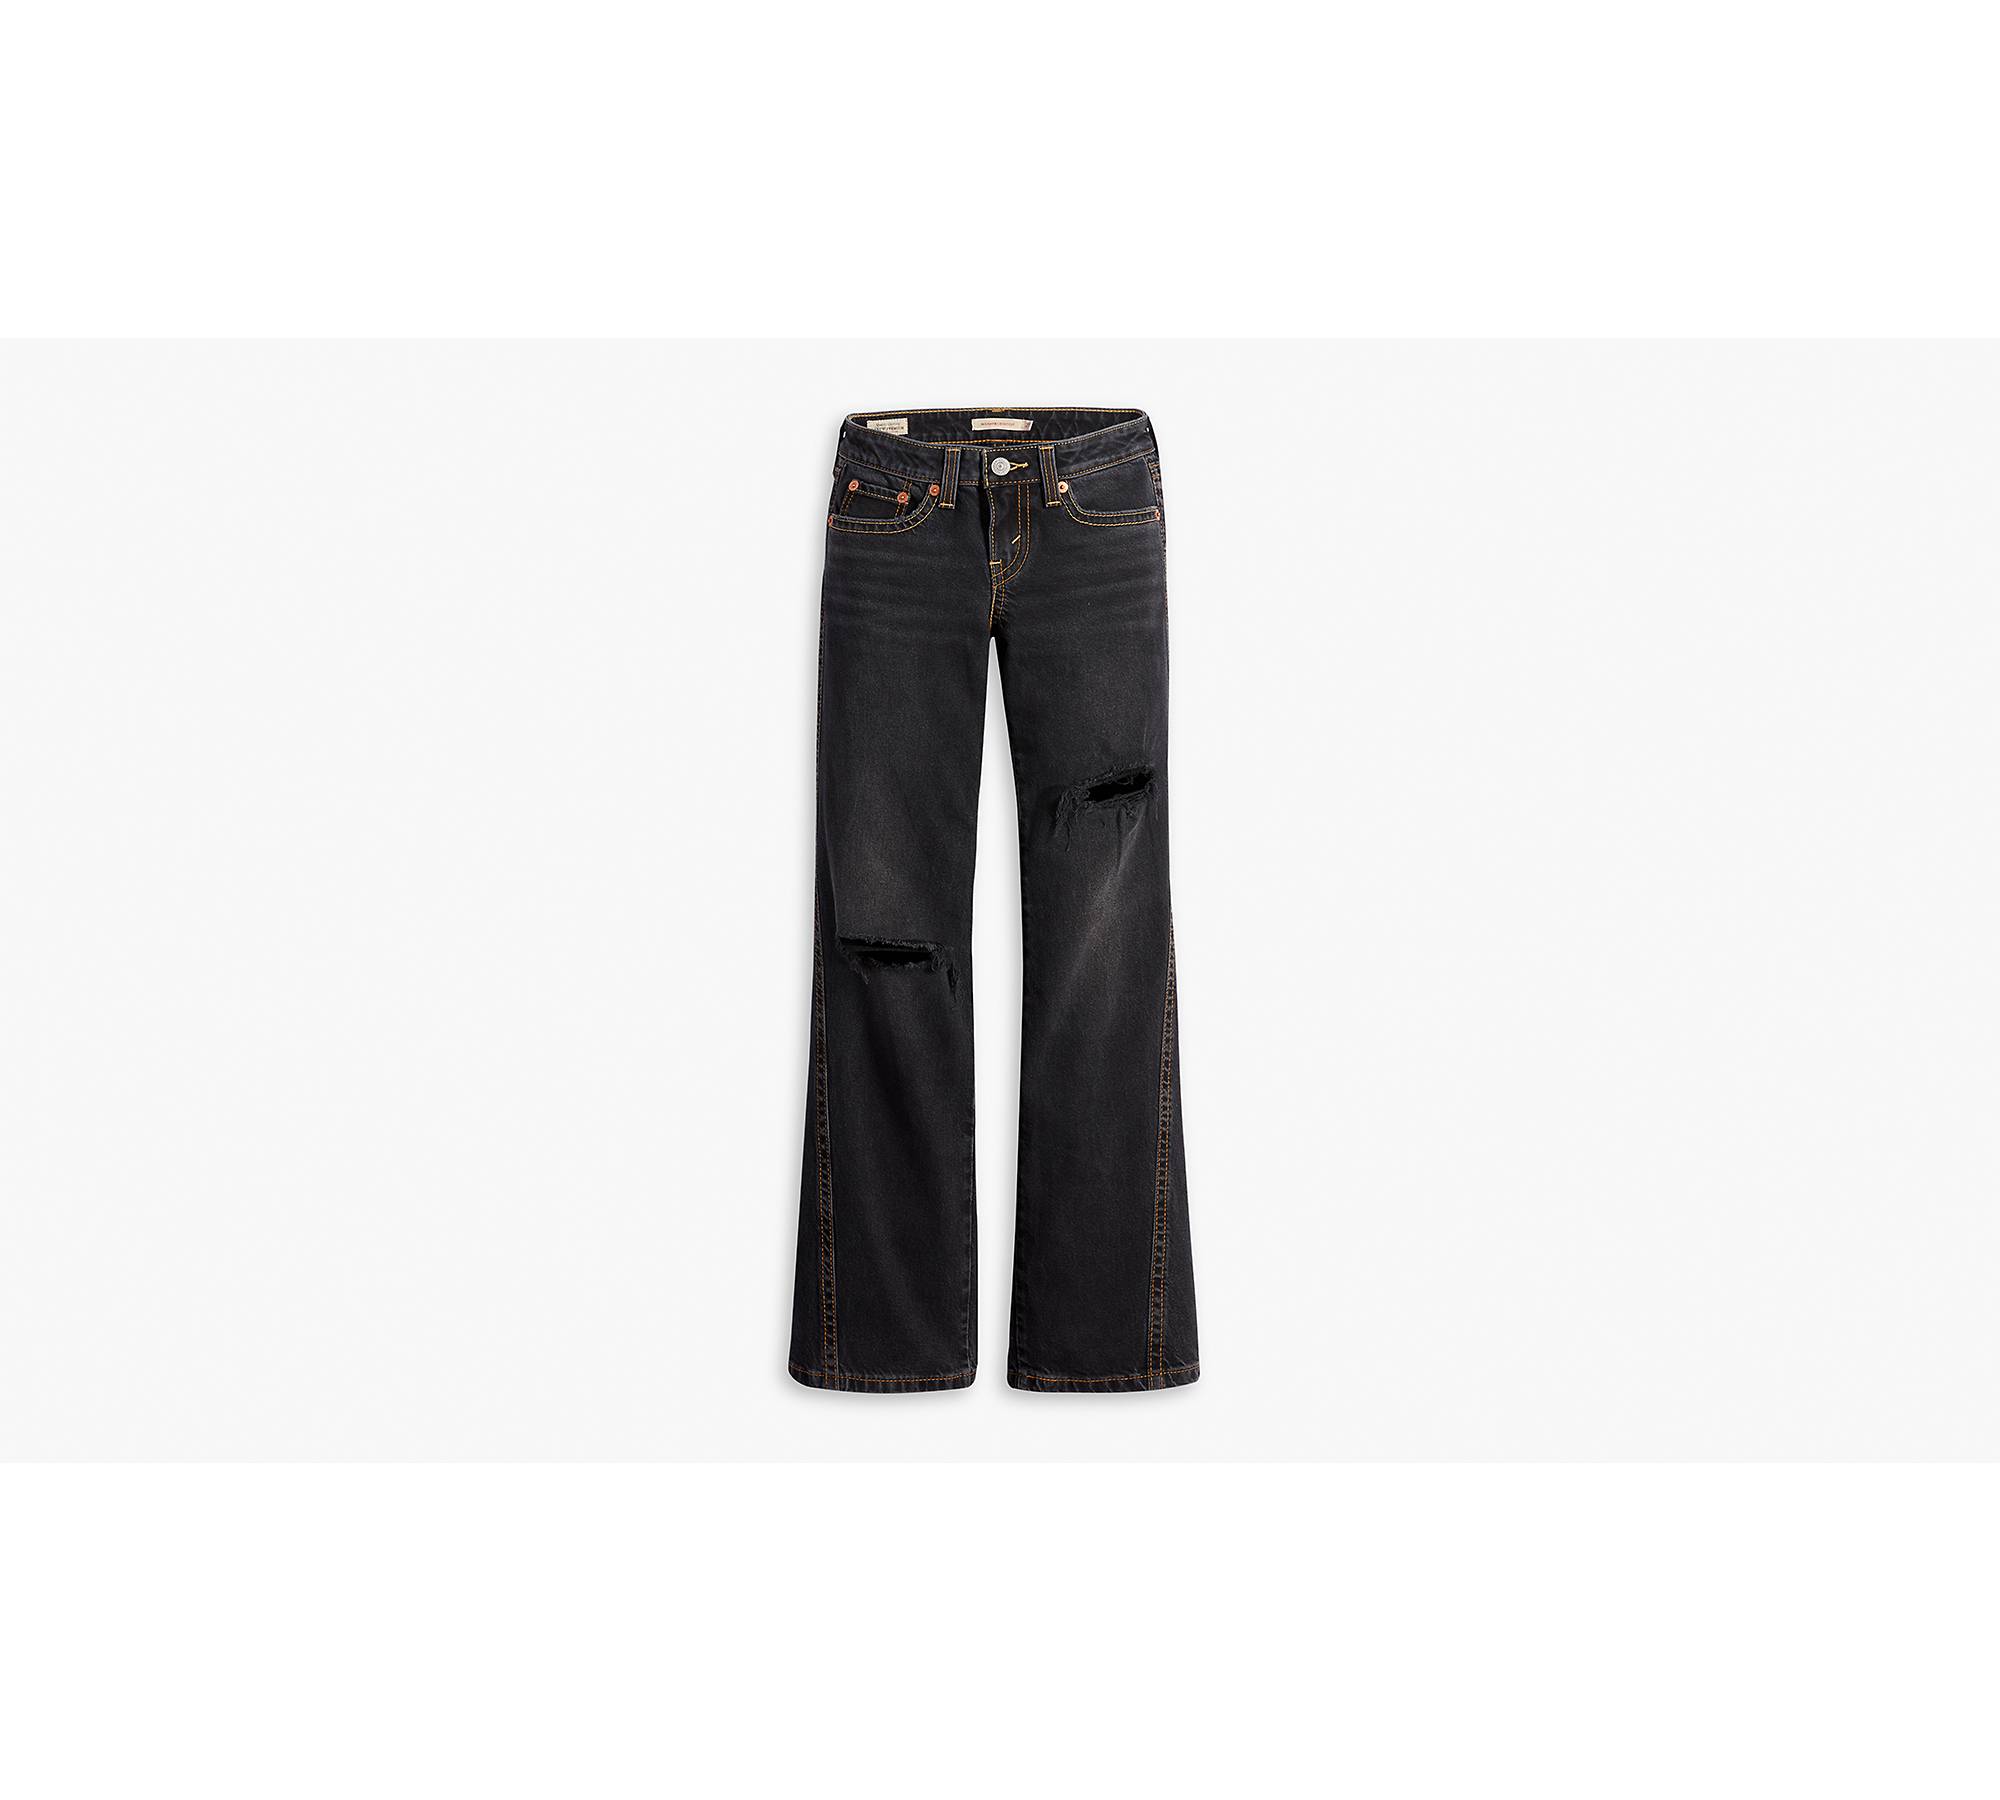 Buy AngelFab Bootcut Jeans for Women & Girls Stretchable Black